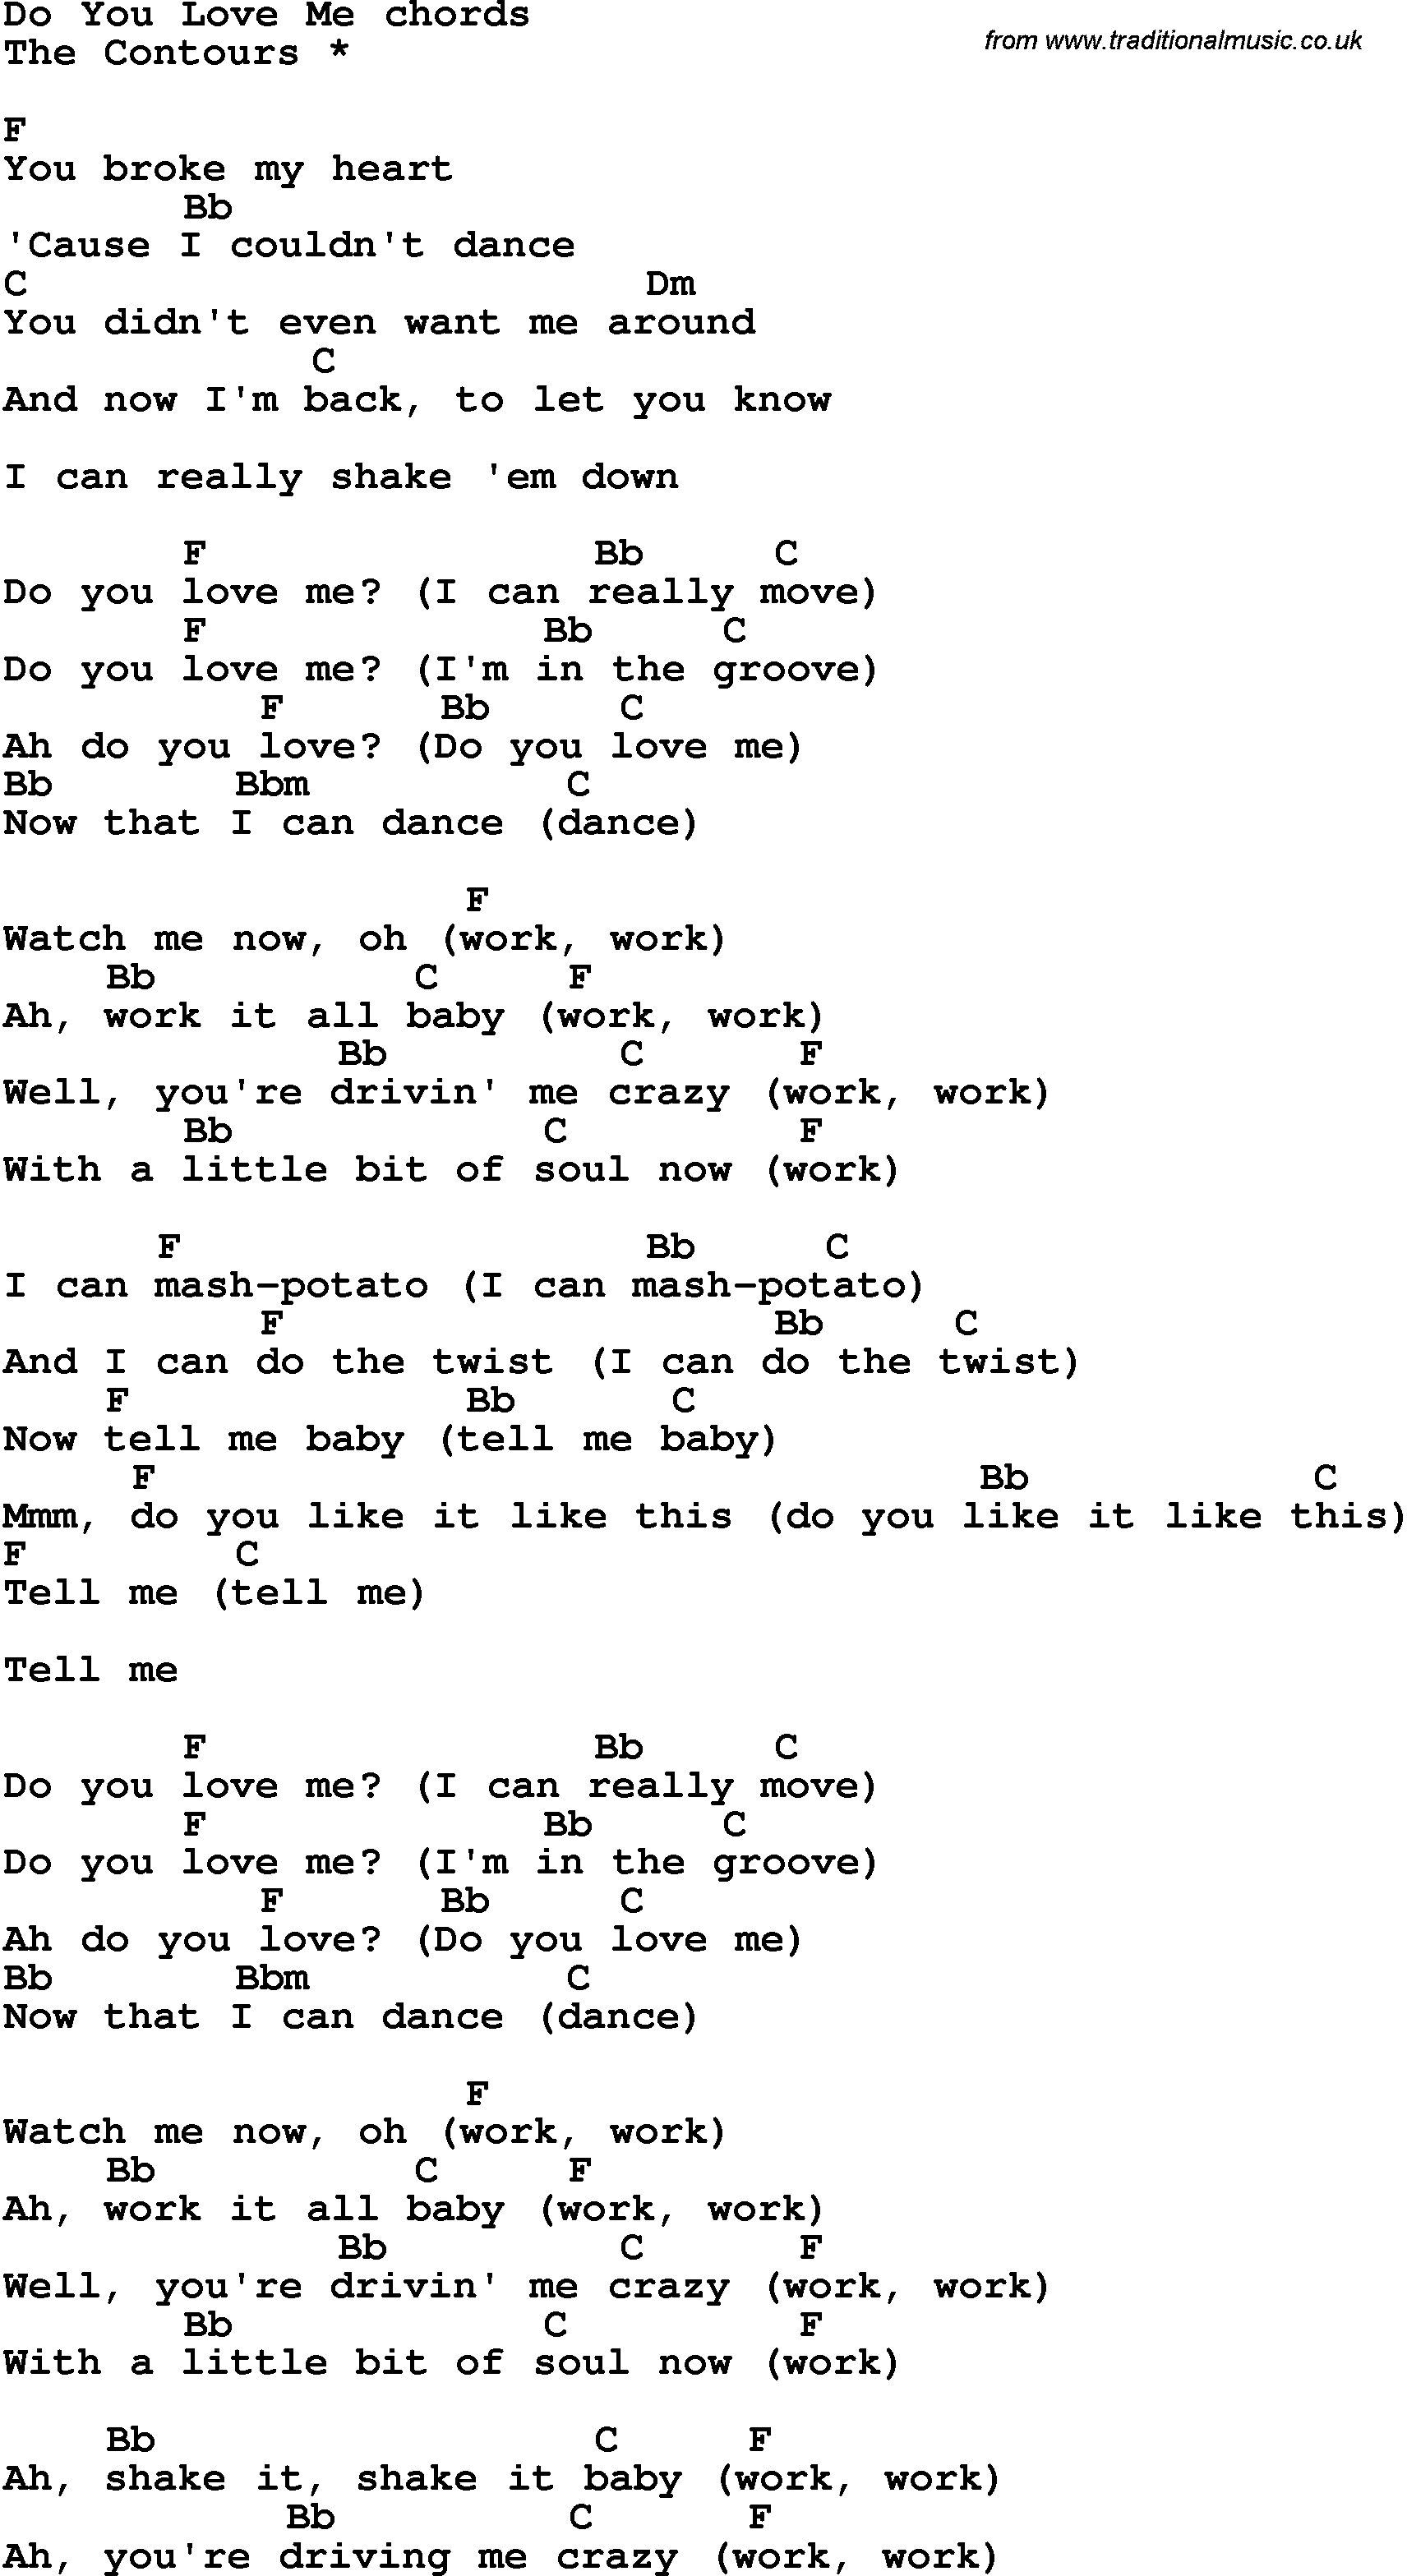 Song Lyrics with guitar chords for Do You Love Me